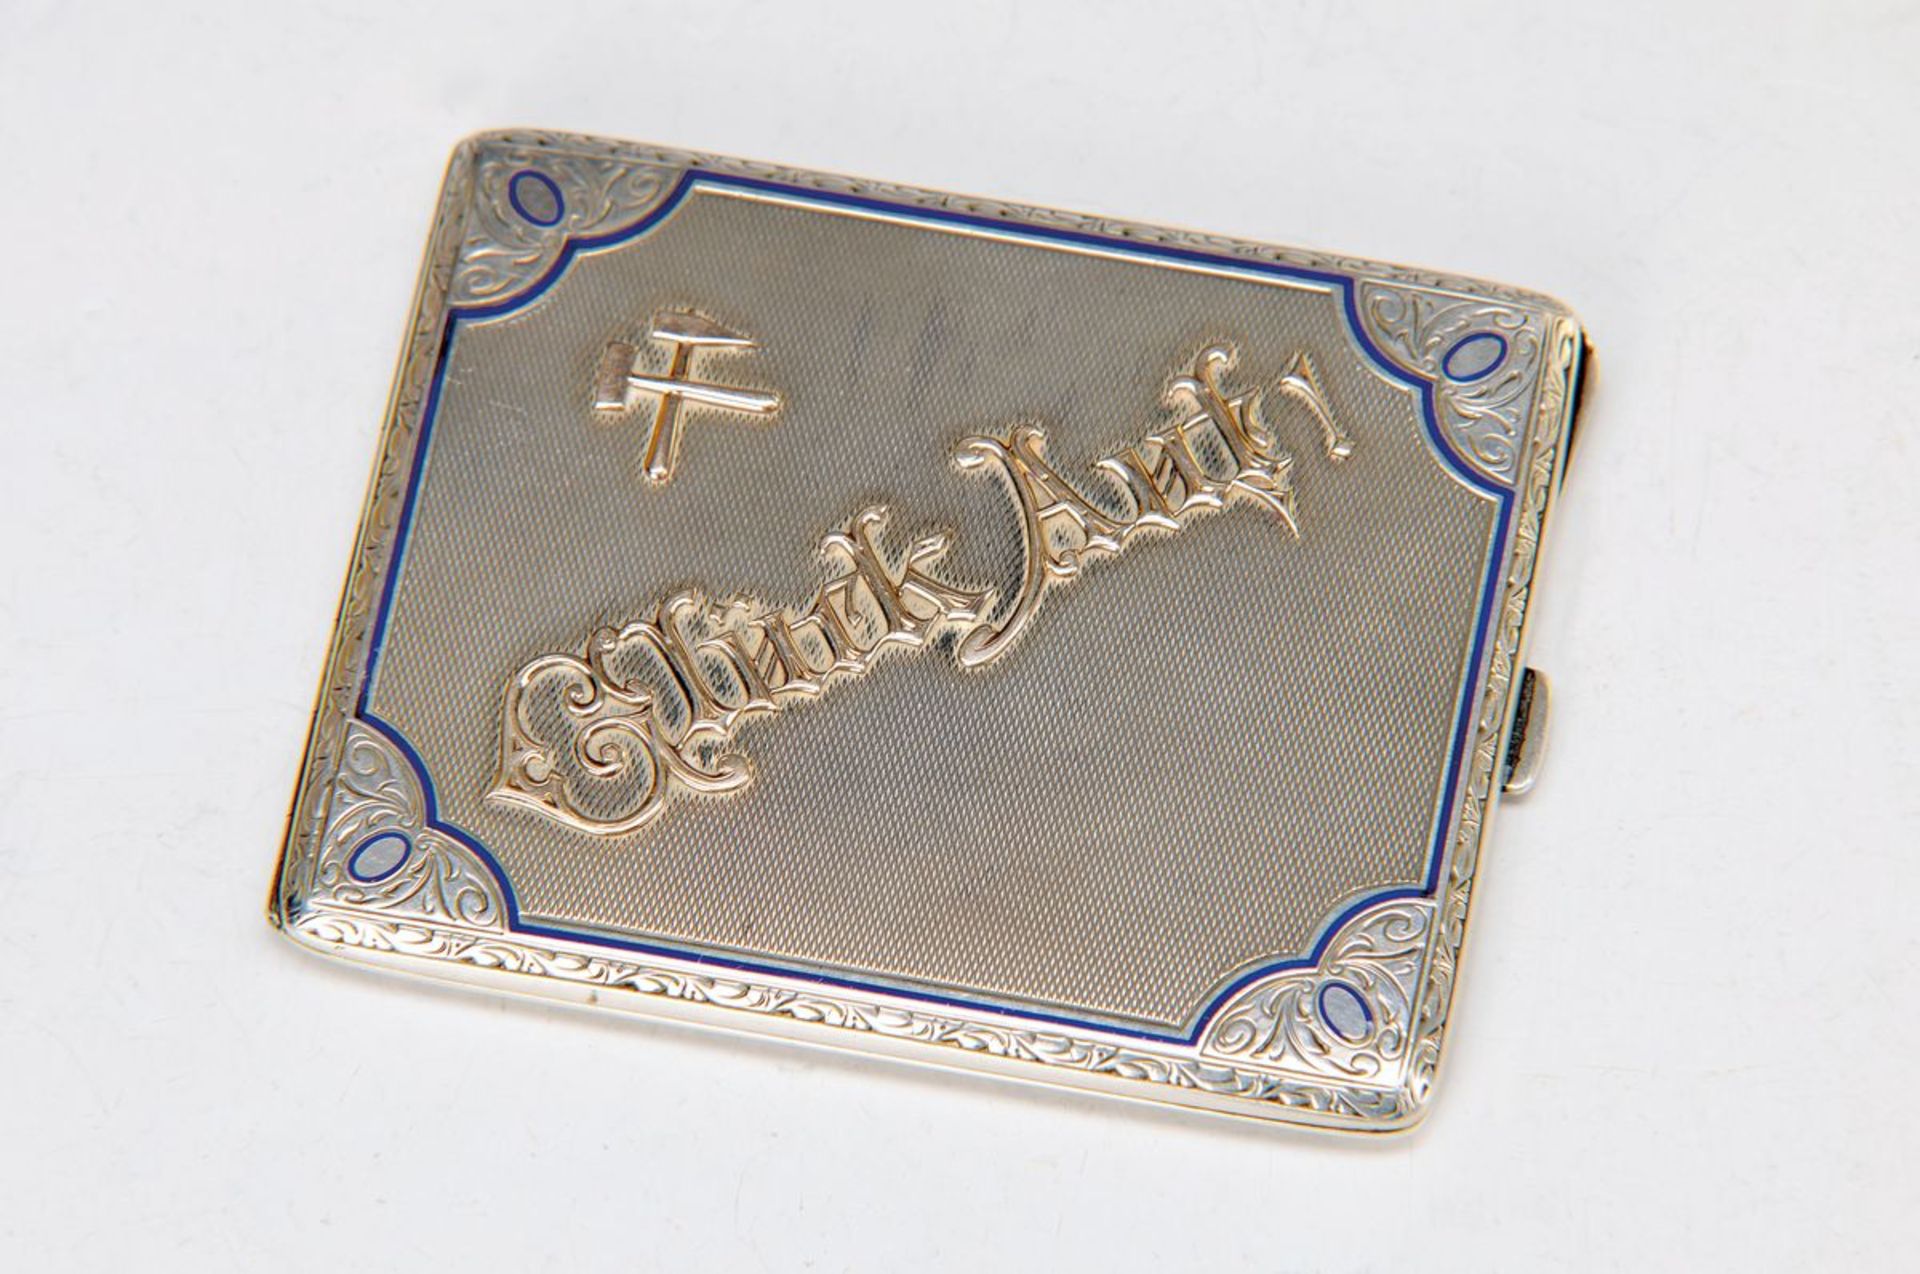 cigarette case, German, around 1900, for a miner, silver engraved and partly blue enameled, with